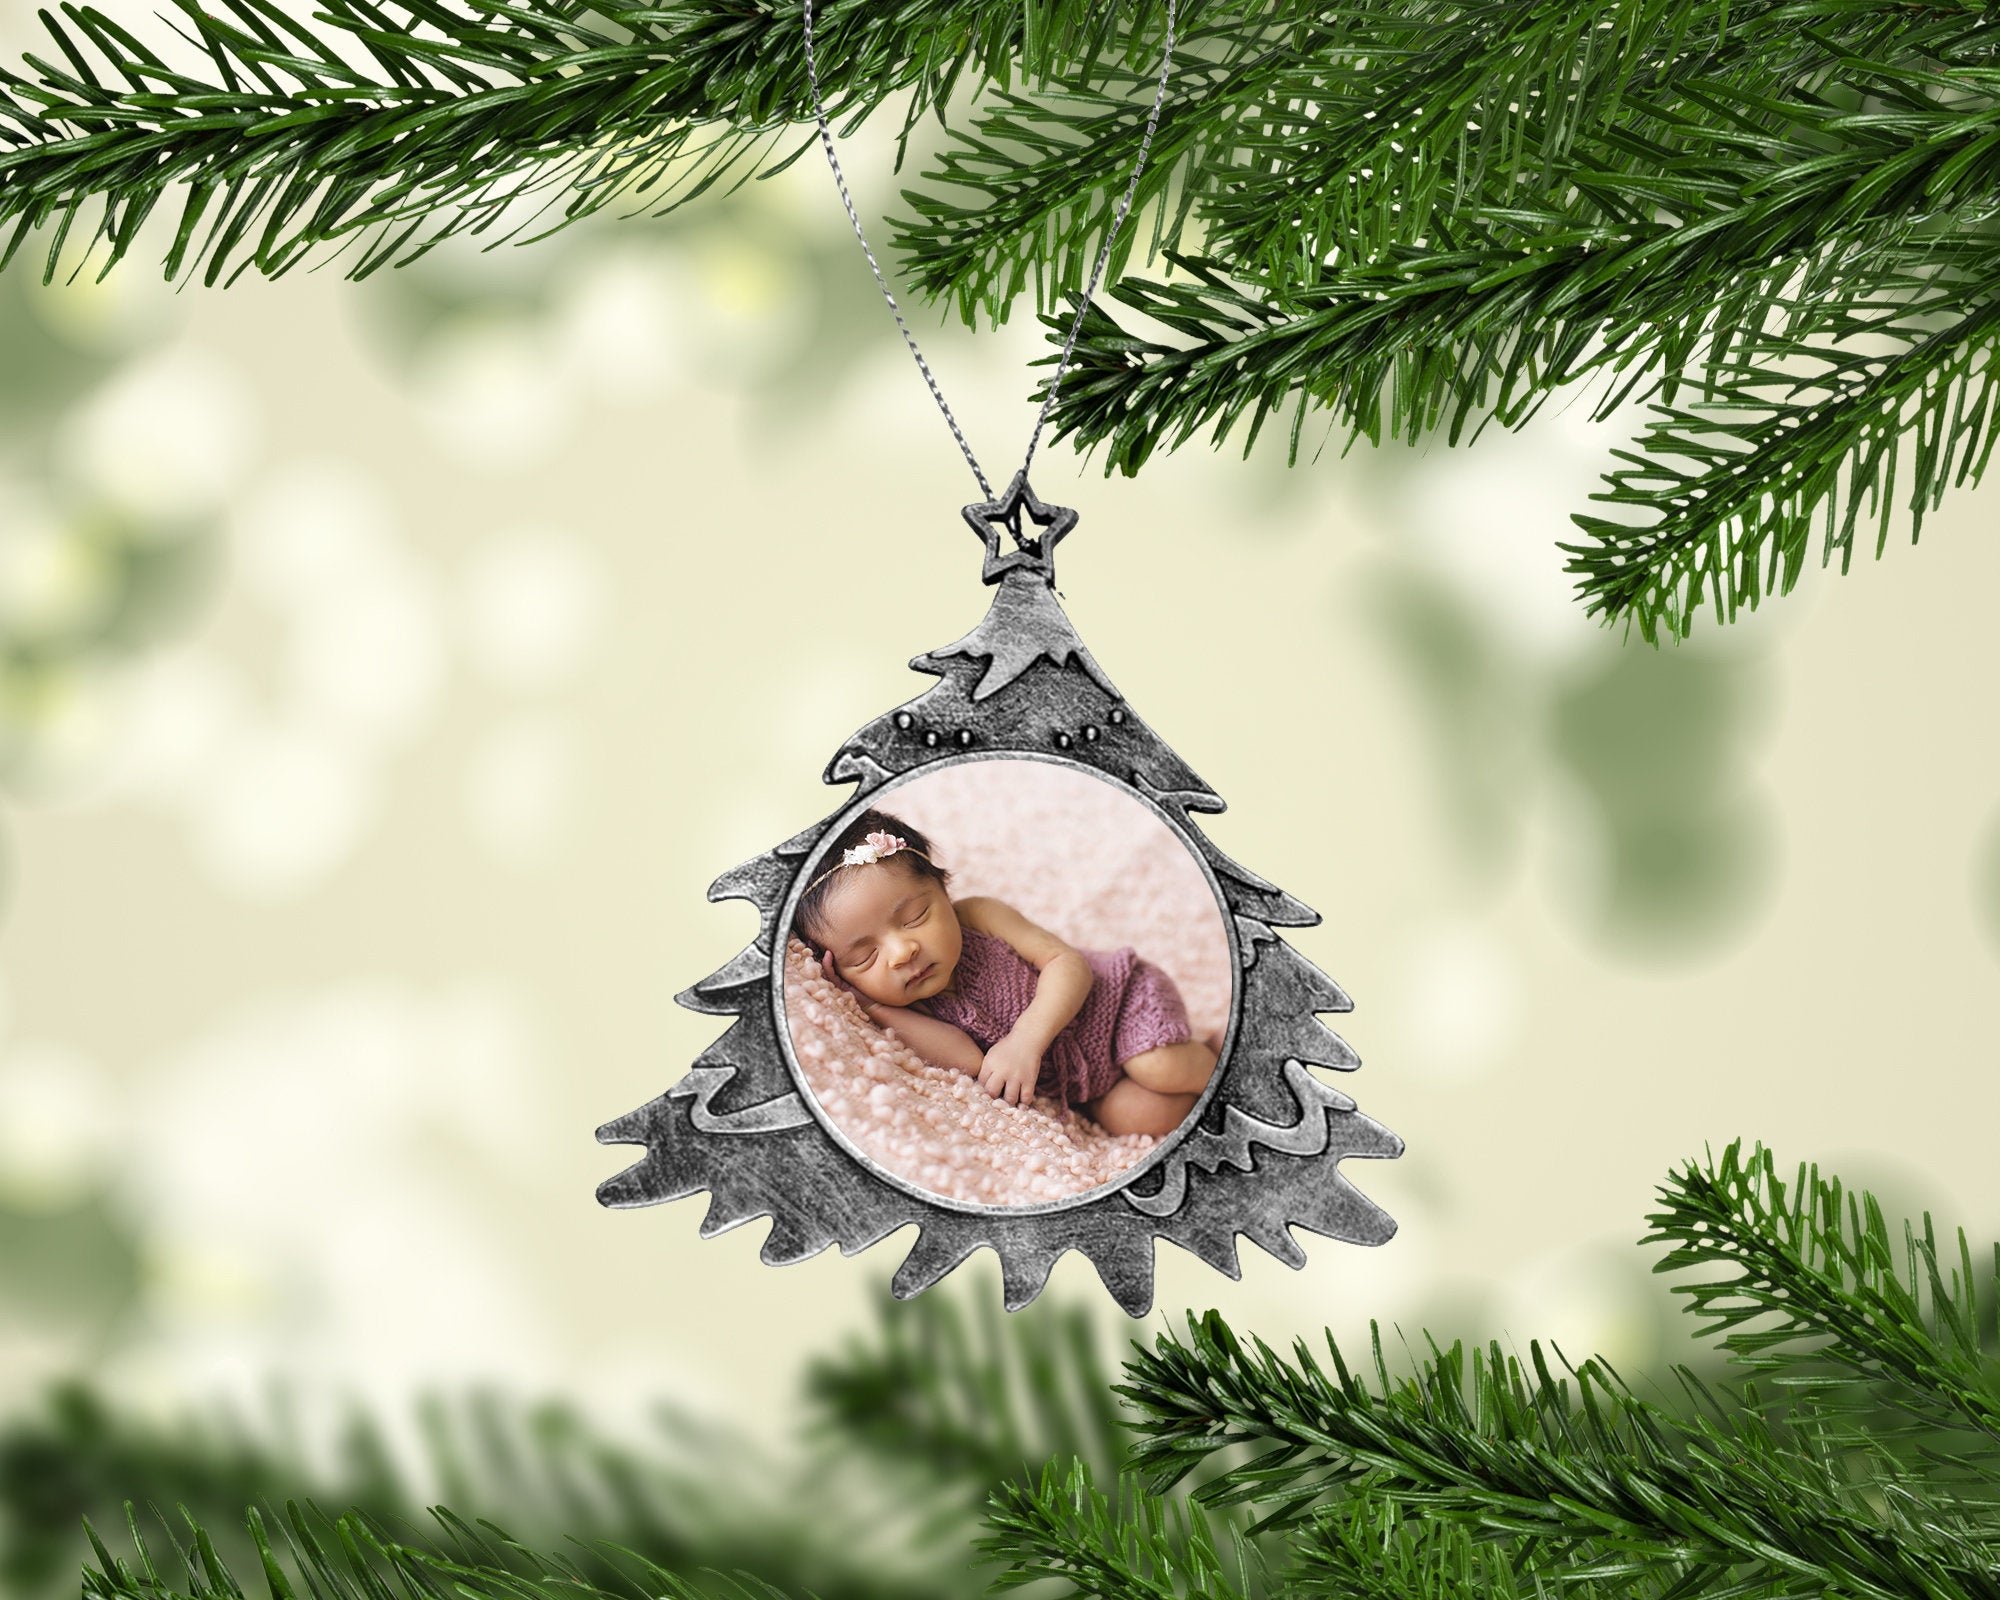 Personalized Antq. Silver Christmas Tree Ornament - Christmas Tree Photo Ornament - Custom Photo Tree Ornament - Add Your Own Photo & Text